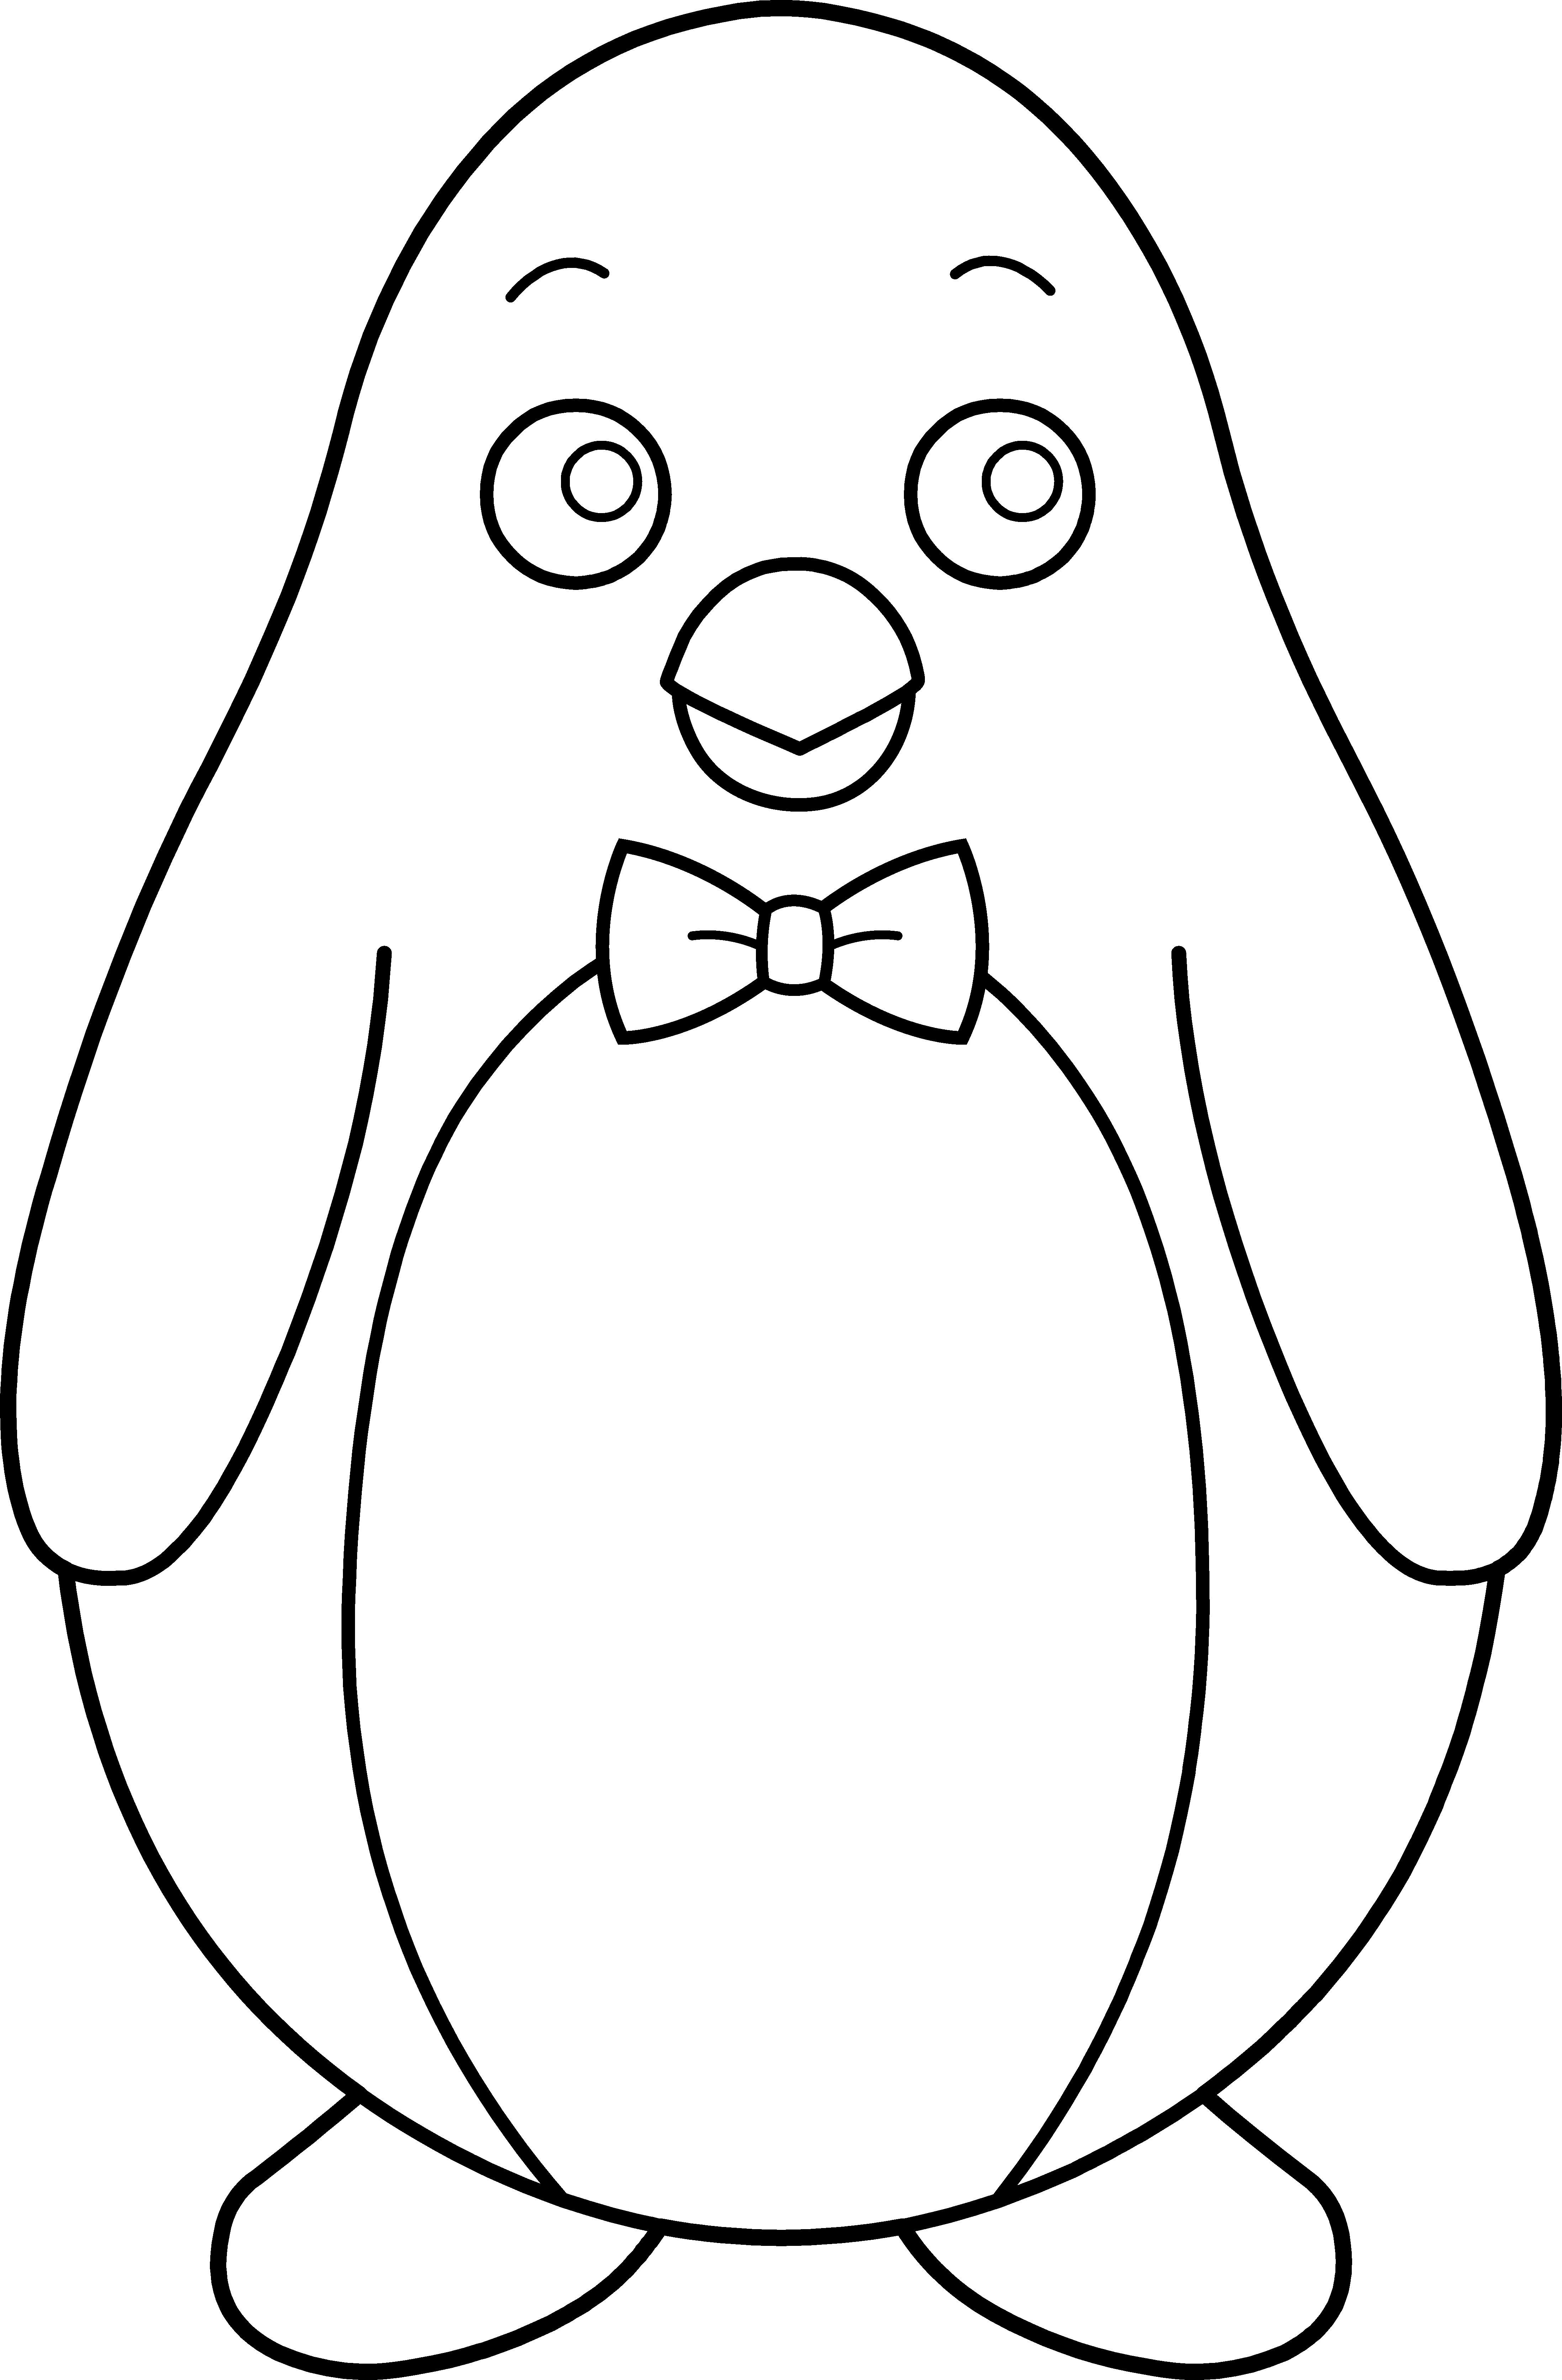 Cute Penguin Clip Art Black And White Images  Pictures - Becuo